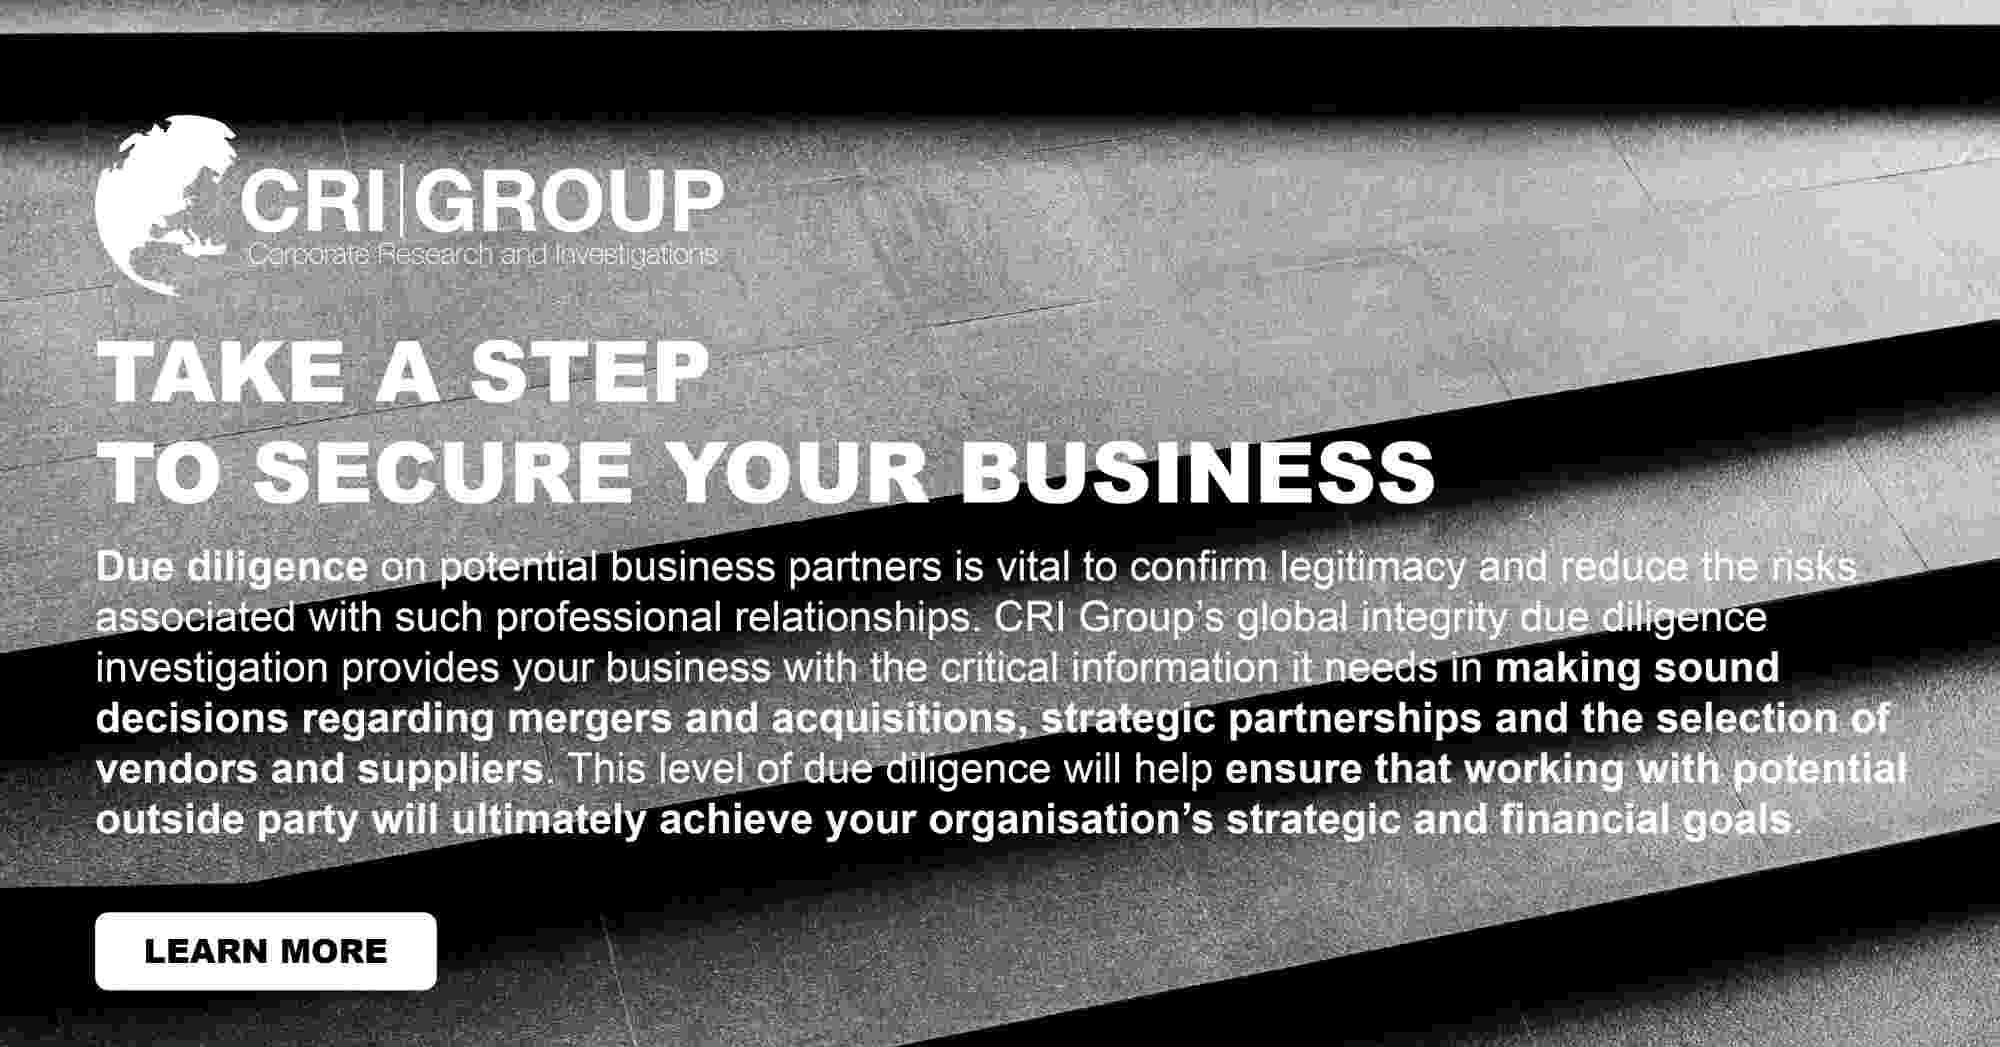 CRI Group™ provides Due Diligence service to secure your business